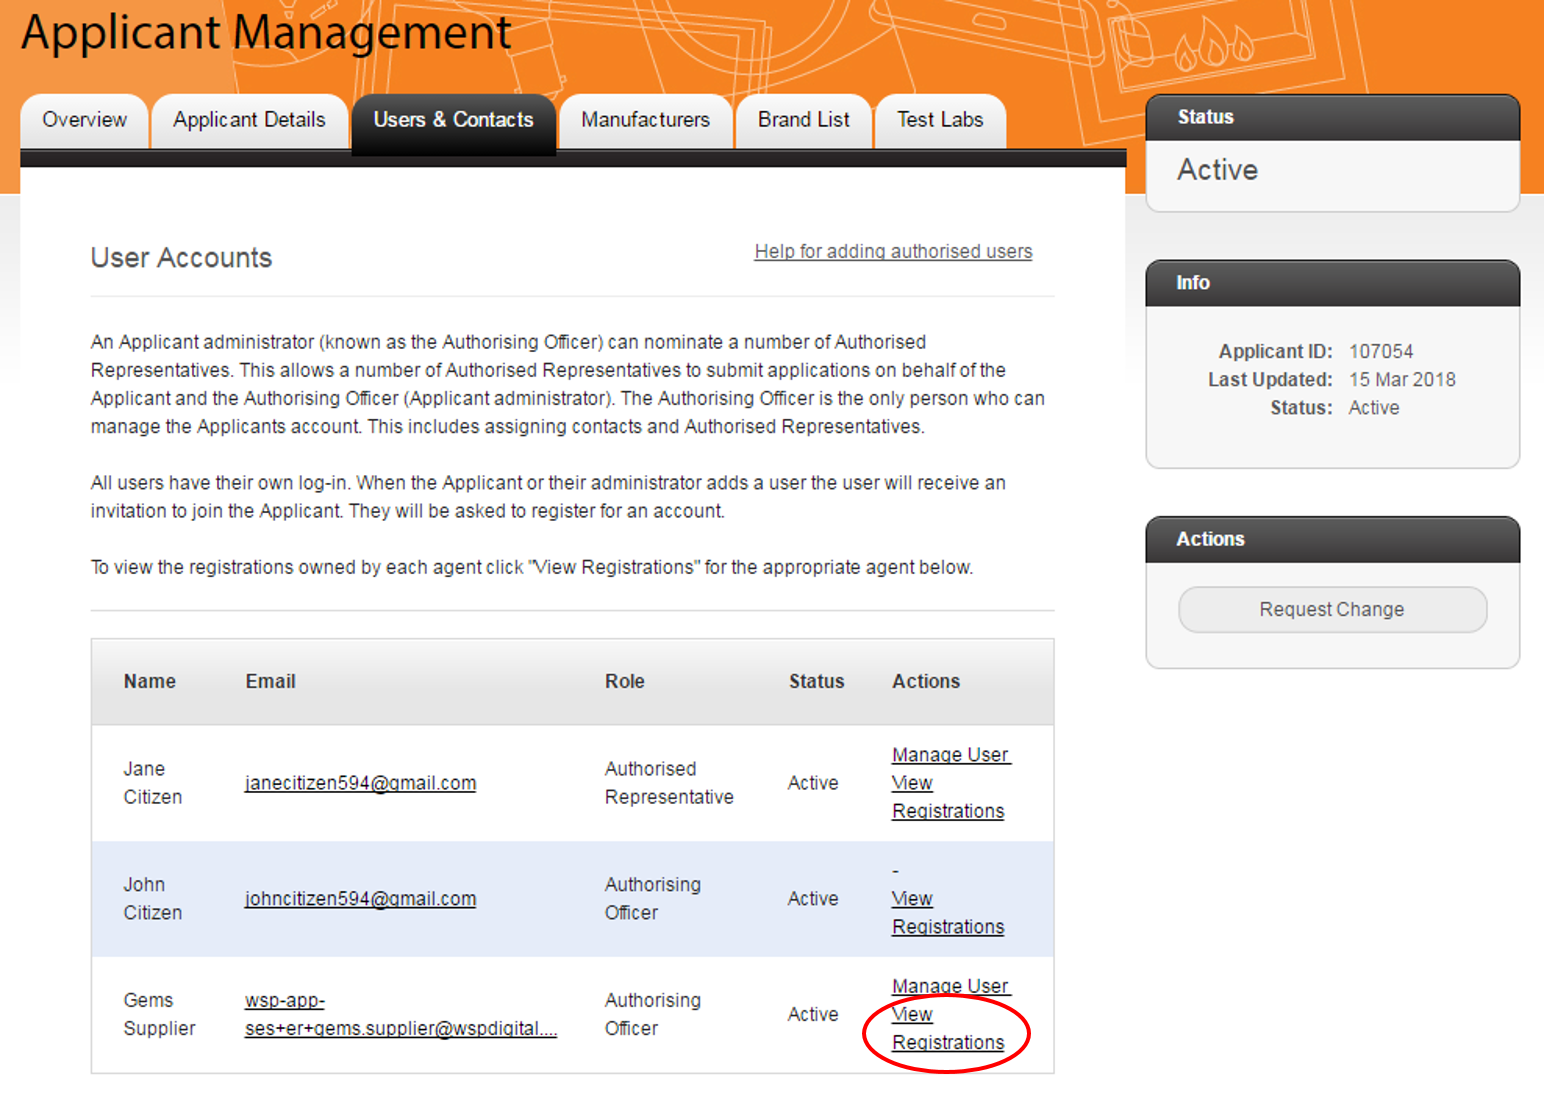 Screenshot of the "Users & Contacts" page with one of the listed users' "View Registrations" link highlighted